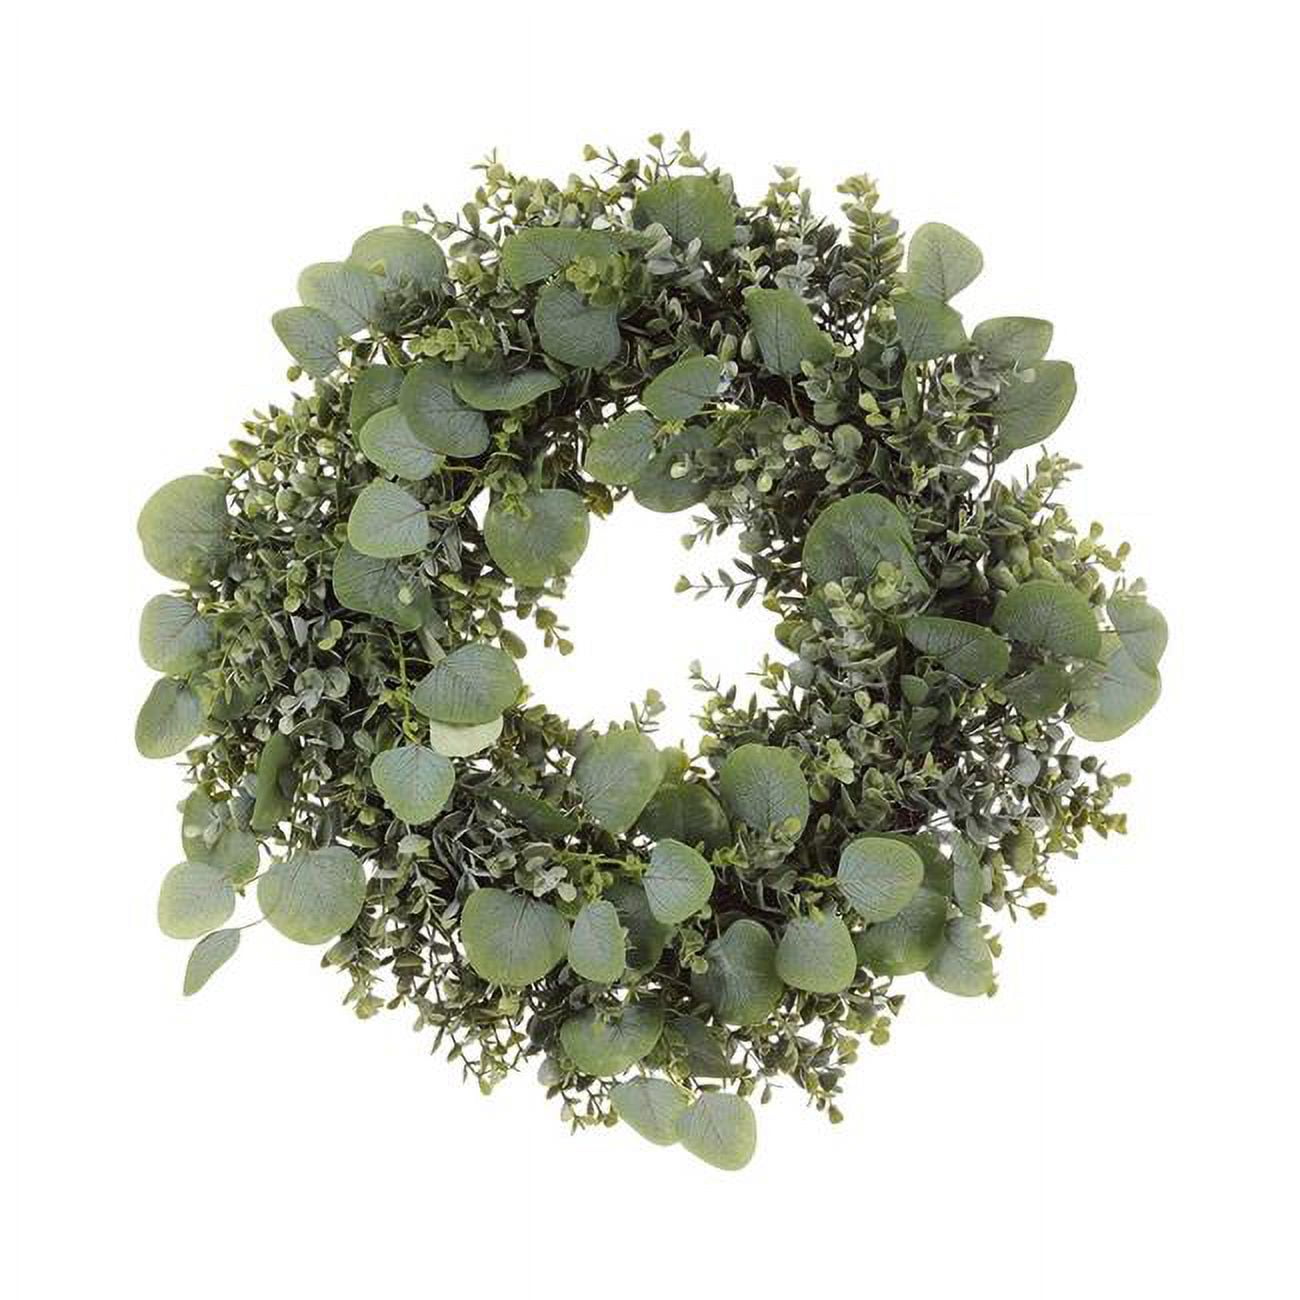 Allstate Floral & Craft PWX007-GR-GY 22 in. Artificial Eucalyptus Leaf & Boxwood Hanging Wreath - Green & Gray -  Allstate Floreal, PWX007-GR/GY